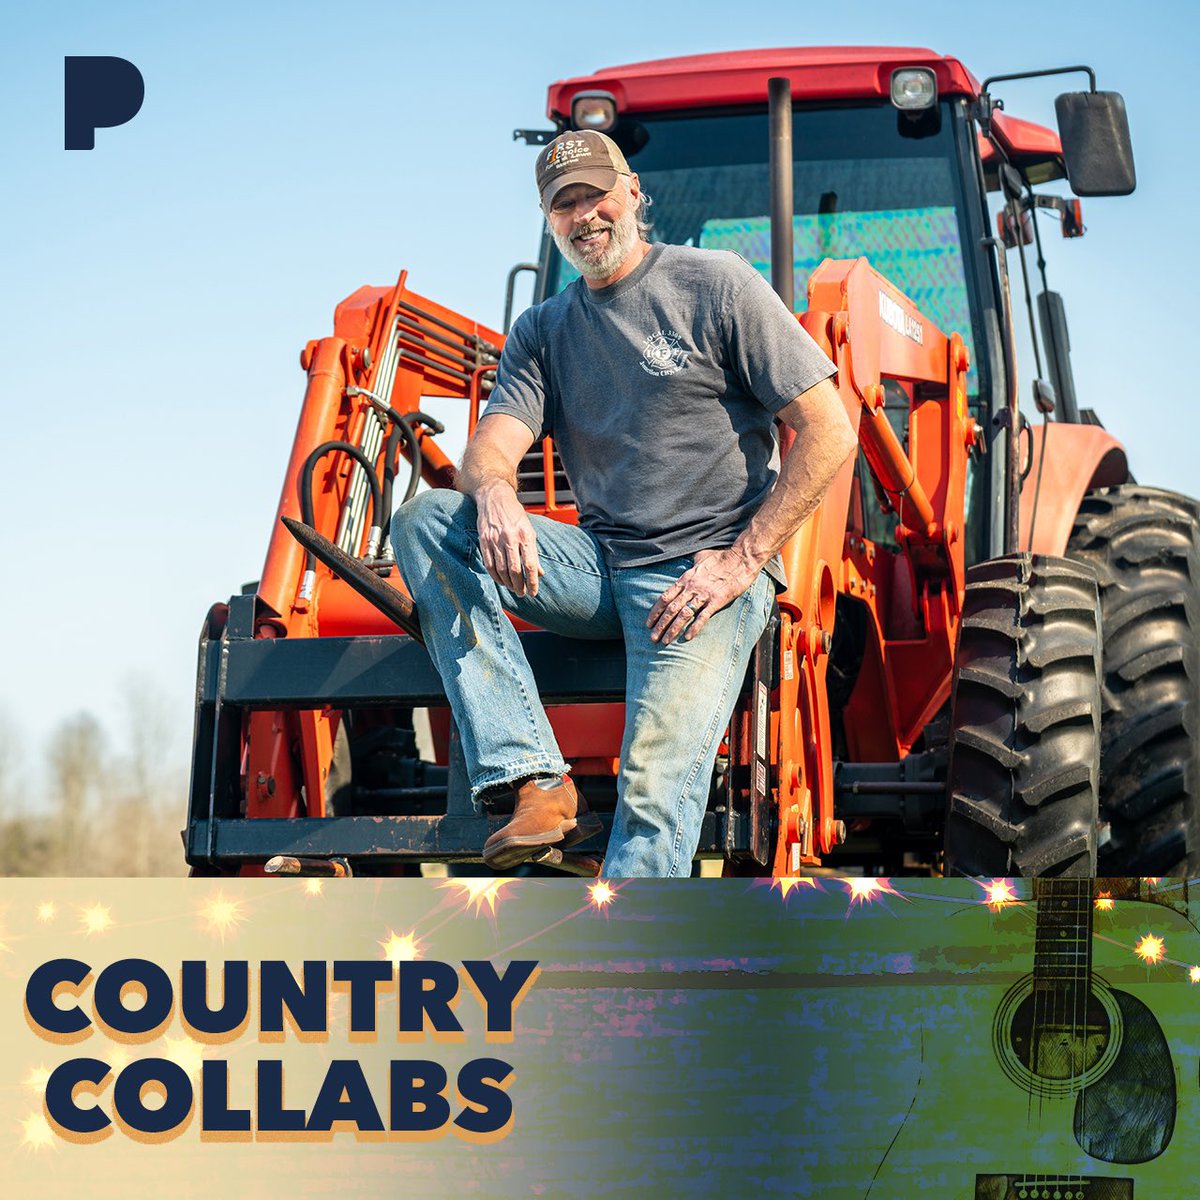 Thank you @Pandora! Check out my new song “Tractor Time” Featuring my buddies @janson_chris & @justincolemoore on Country Collabs!” Link: pandora.app.link/countrycollabs